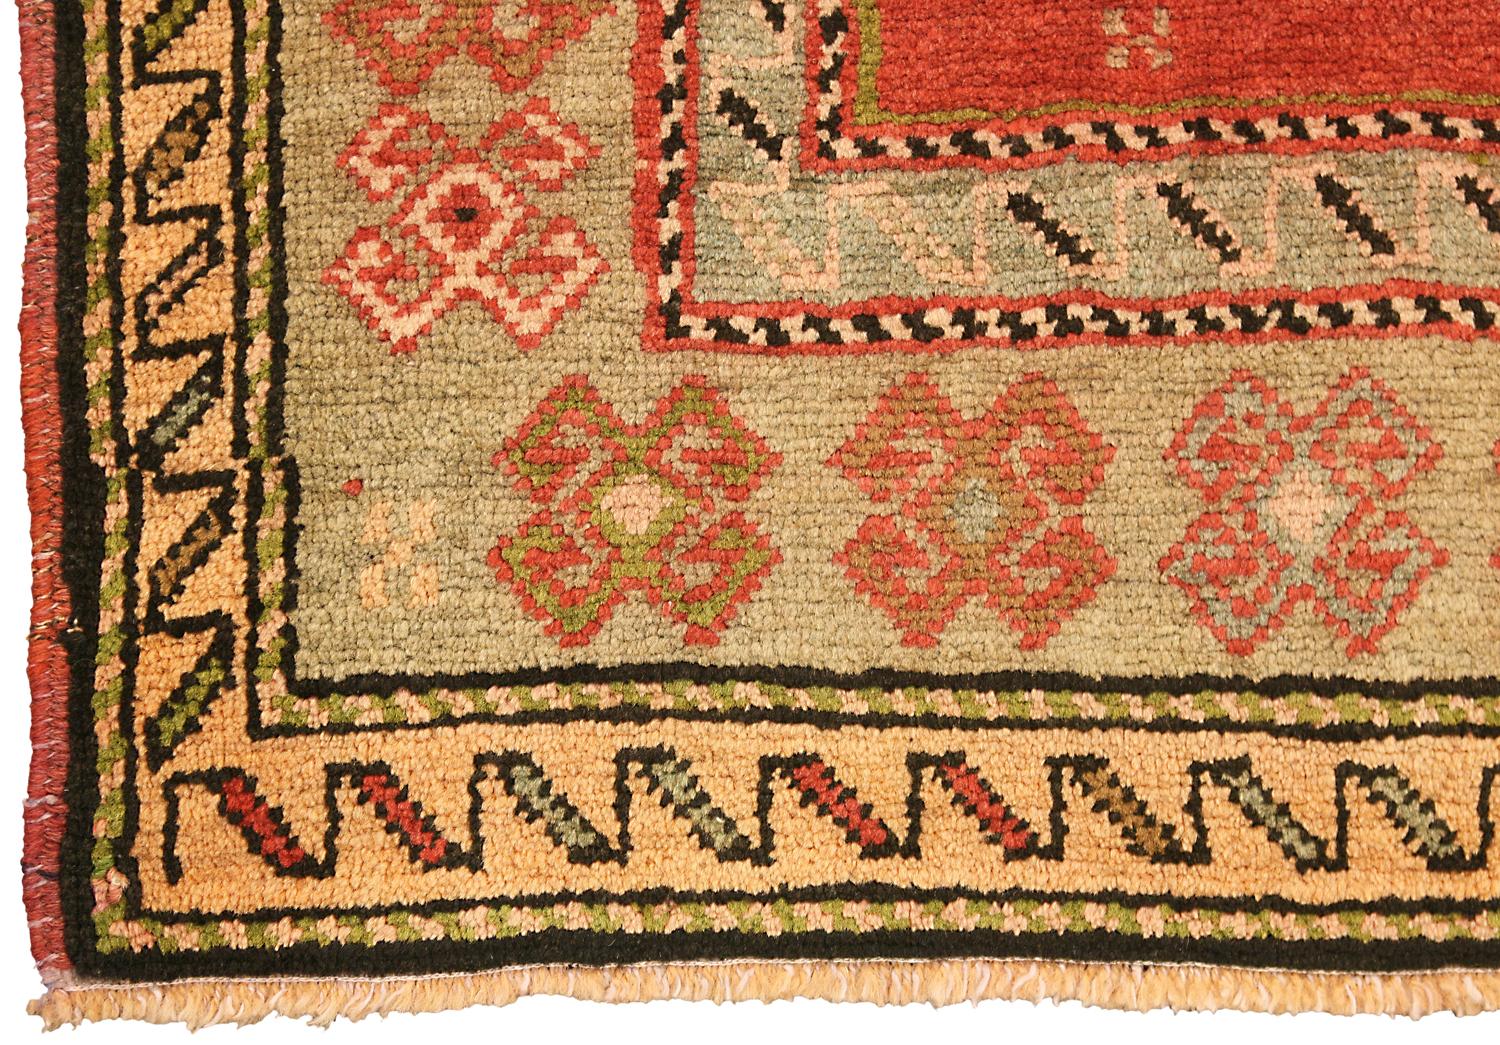 This is a vintage Karabakh rug woven in the southern Caucasus during the mid-20th century circa 1950 – 1970 and measures 287 by 158 CM in size. This piece has a triple medallion design each decorated with steppingstones and an inner hooked